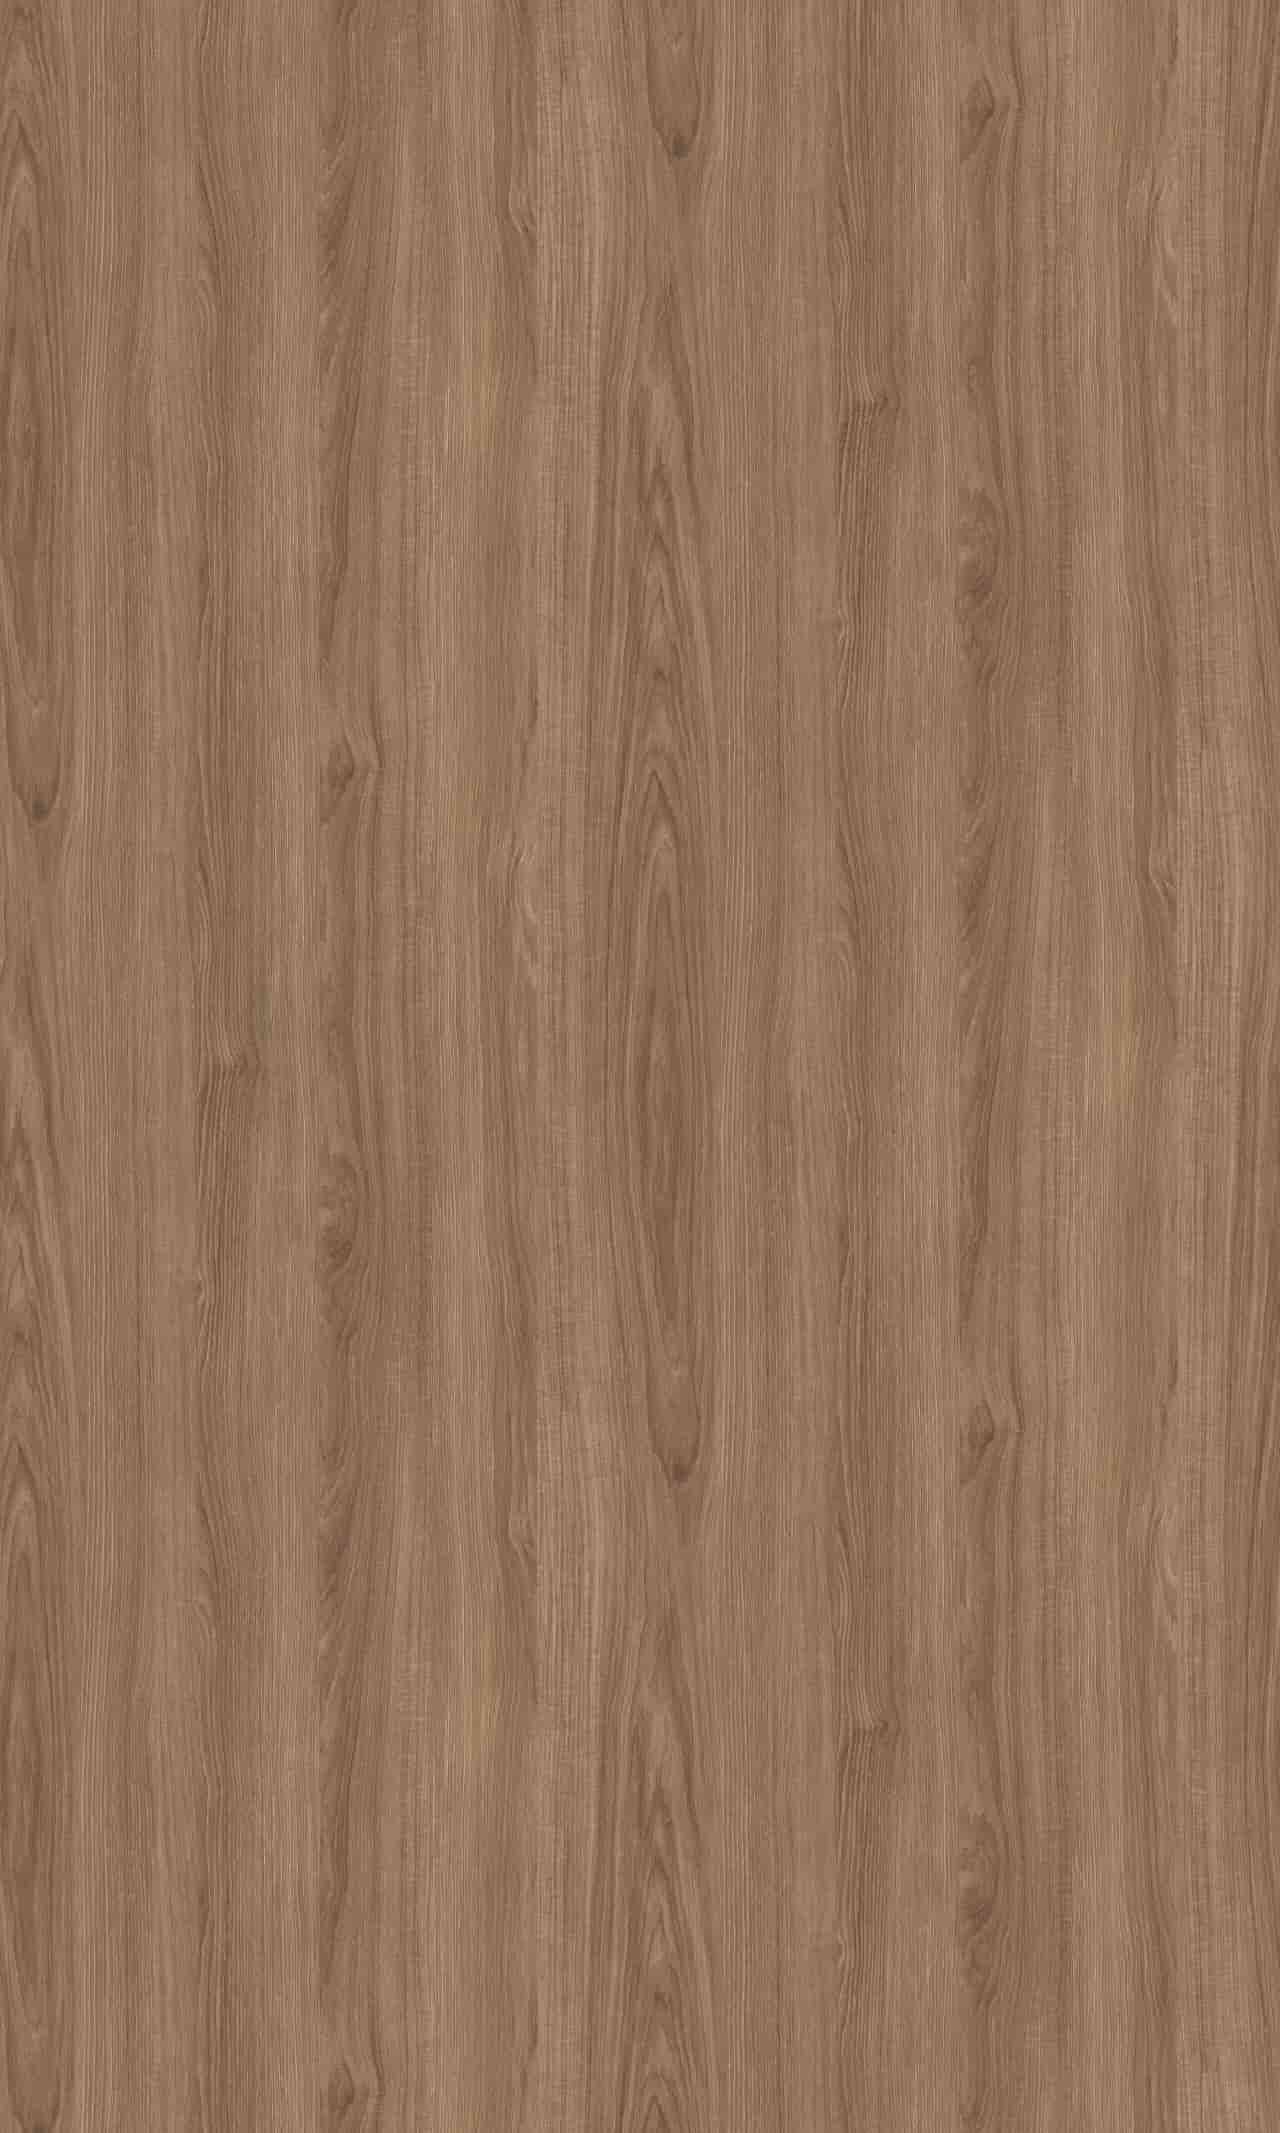 Walnut Wood Facts and Uses of the Beautiful Brown Hardwood